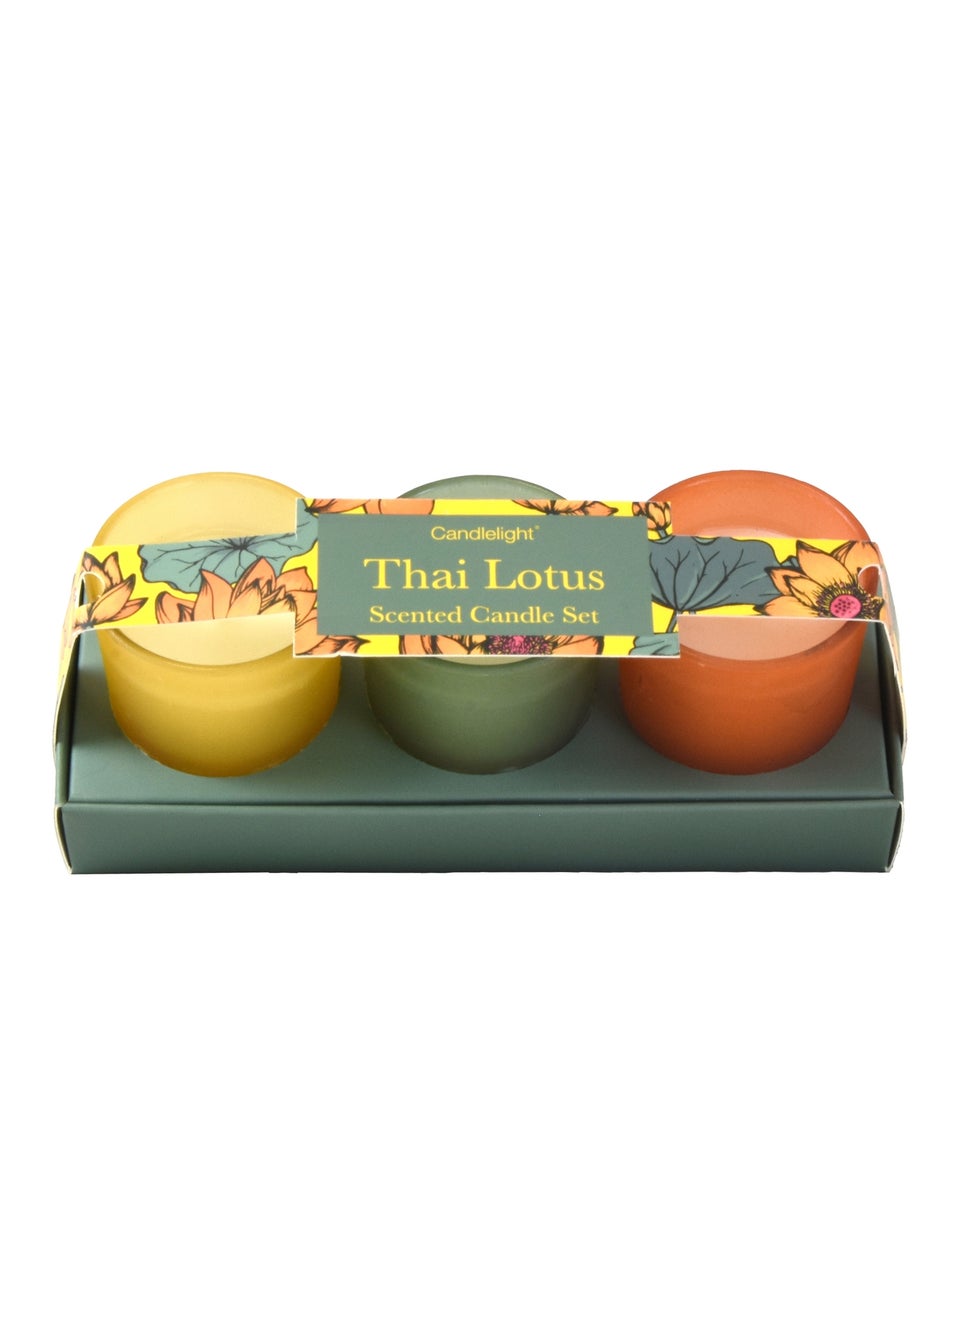 Candlelight 3 Pack Thai Lotus Scented Candle Set